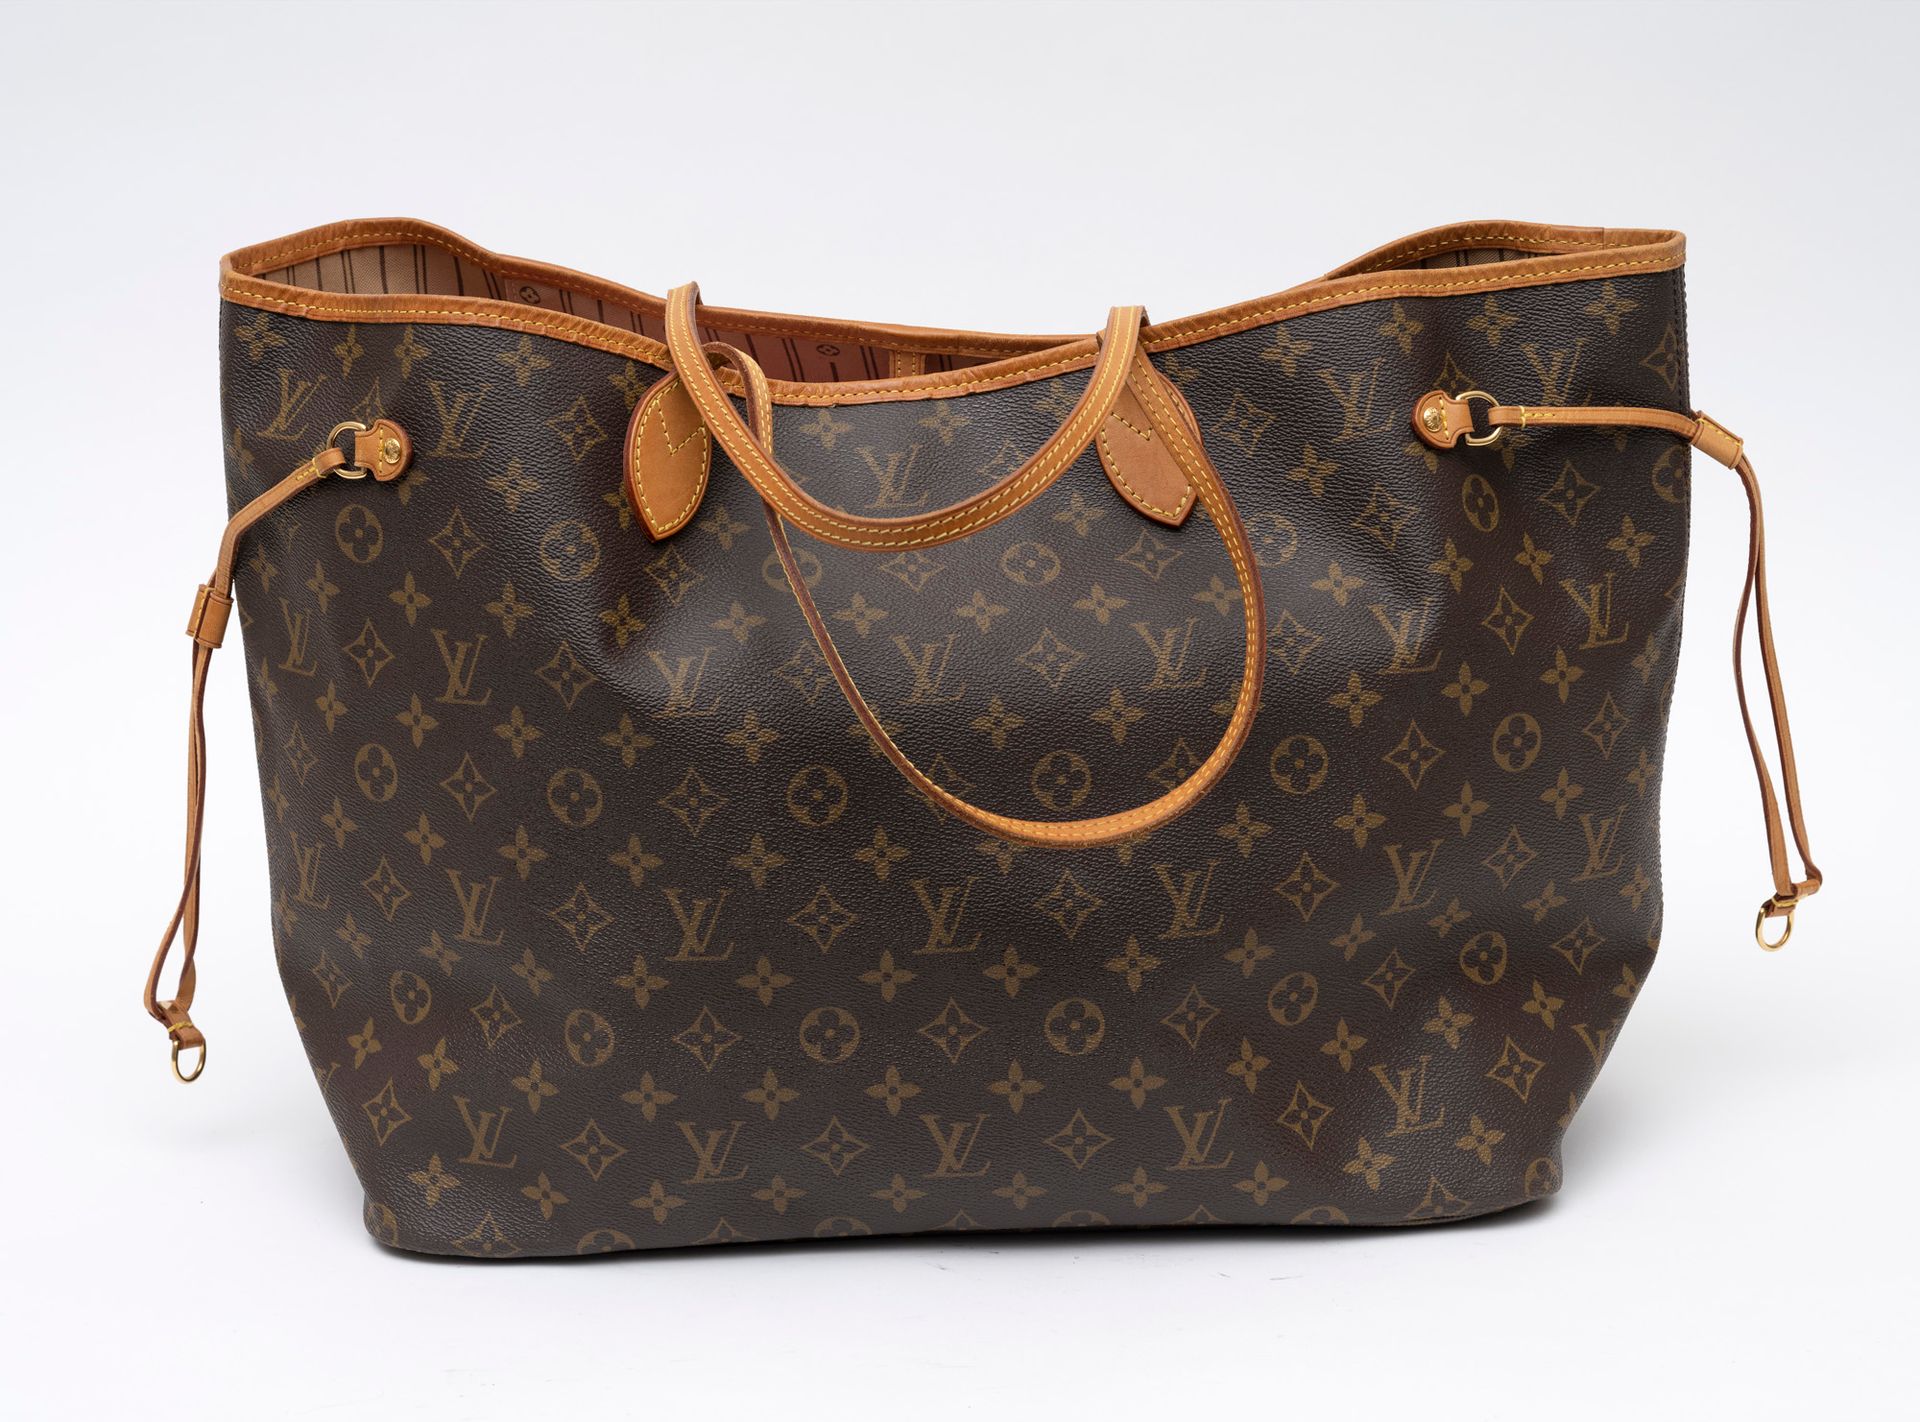 Louis Vuitton Neverfull GM bag in monogram canvas and natural